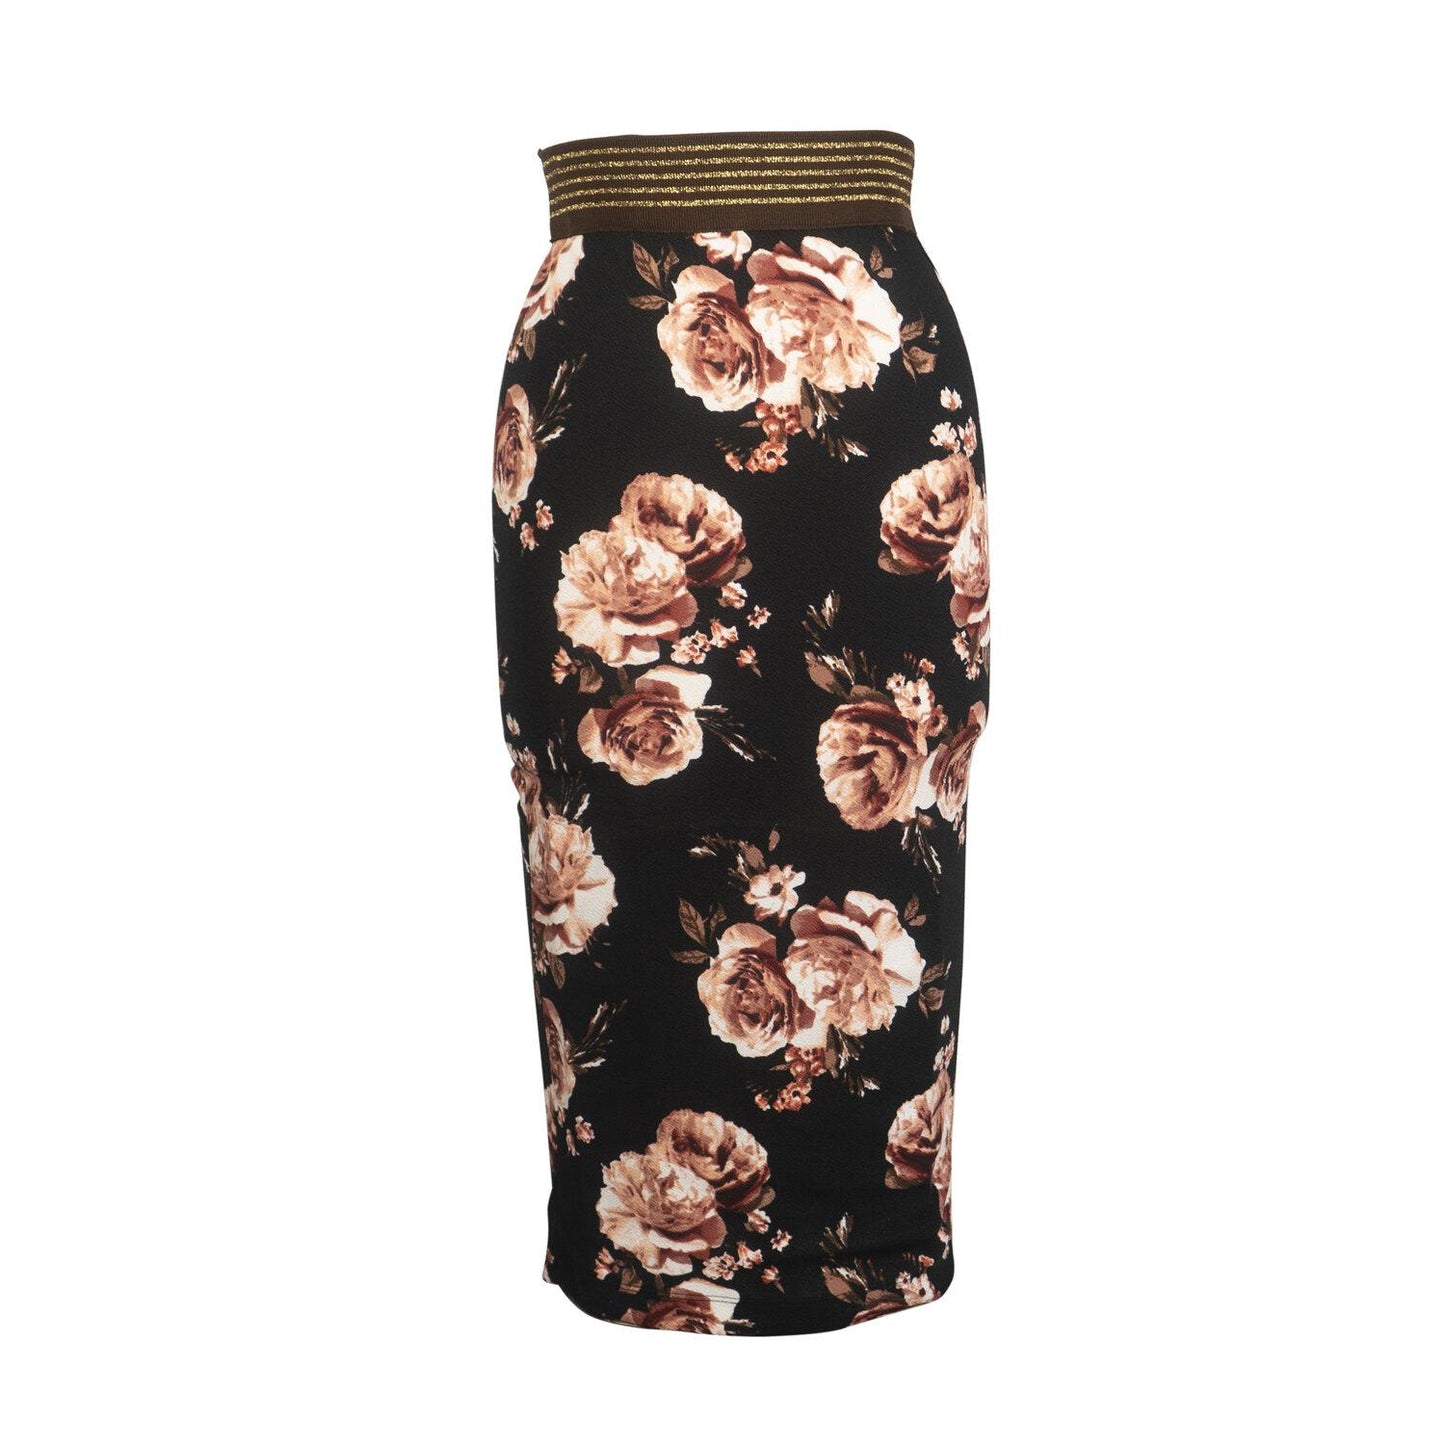 Black midi pencil skirt with floral print featuring shades of pink, mauve, and brown. The waist is accented with a thick, brown and gold striped elastic waistband and the hem sits below the knee in length. Soft vintage inspired romantic bohemian style.